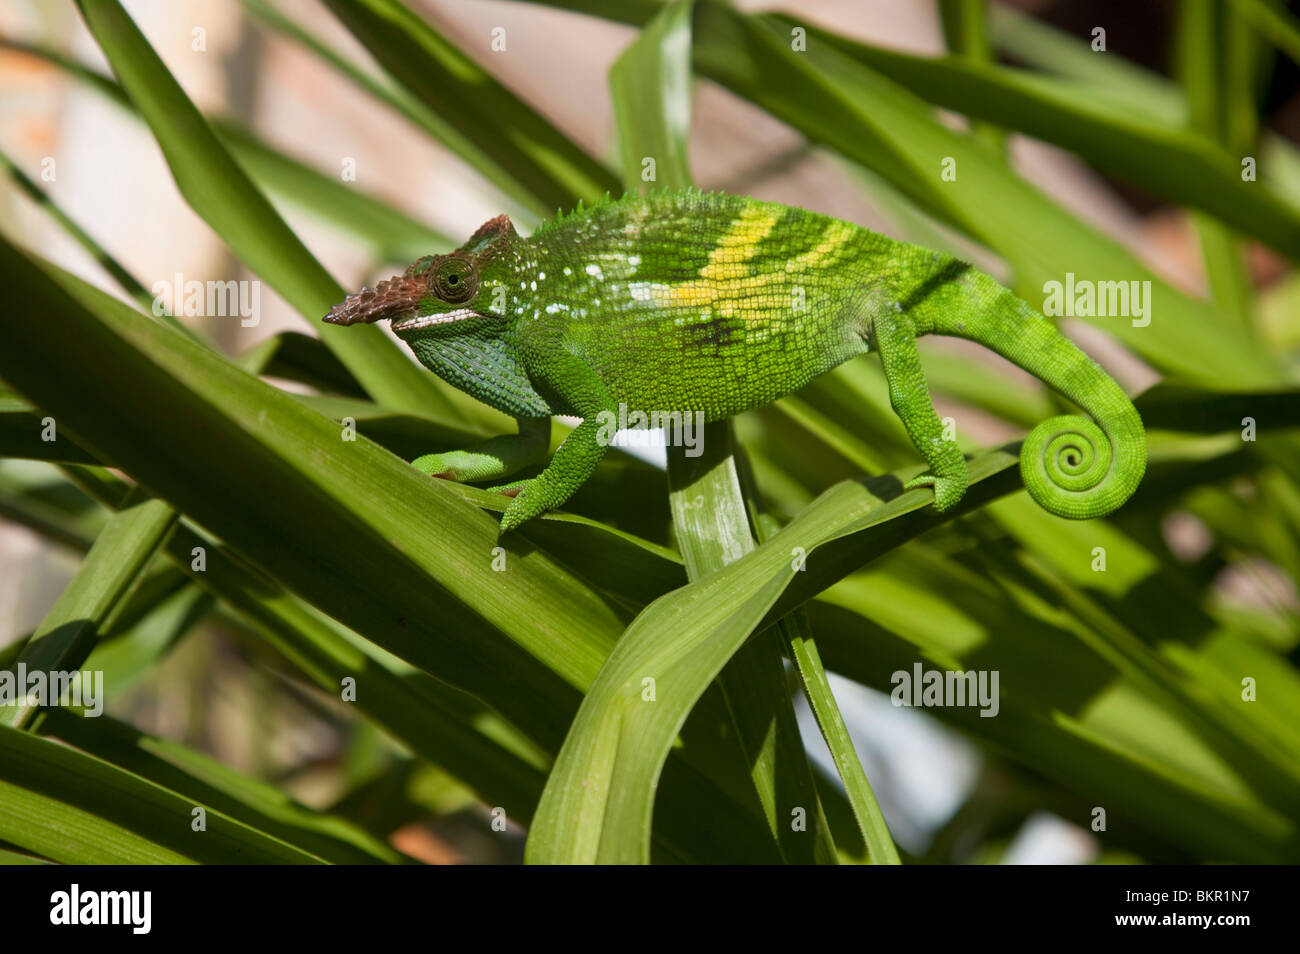 Tanzania. An African Two-horned chameleon carefully picks it's way through the tall grasses. Stock Photo